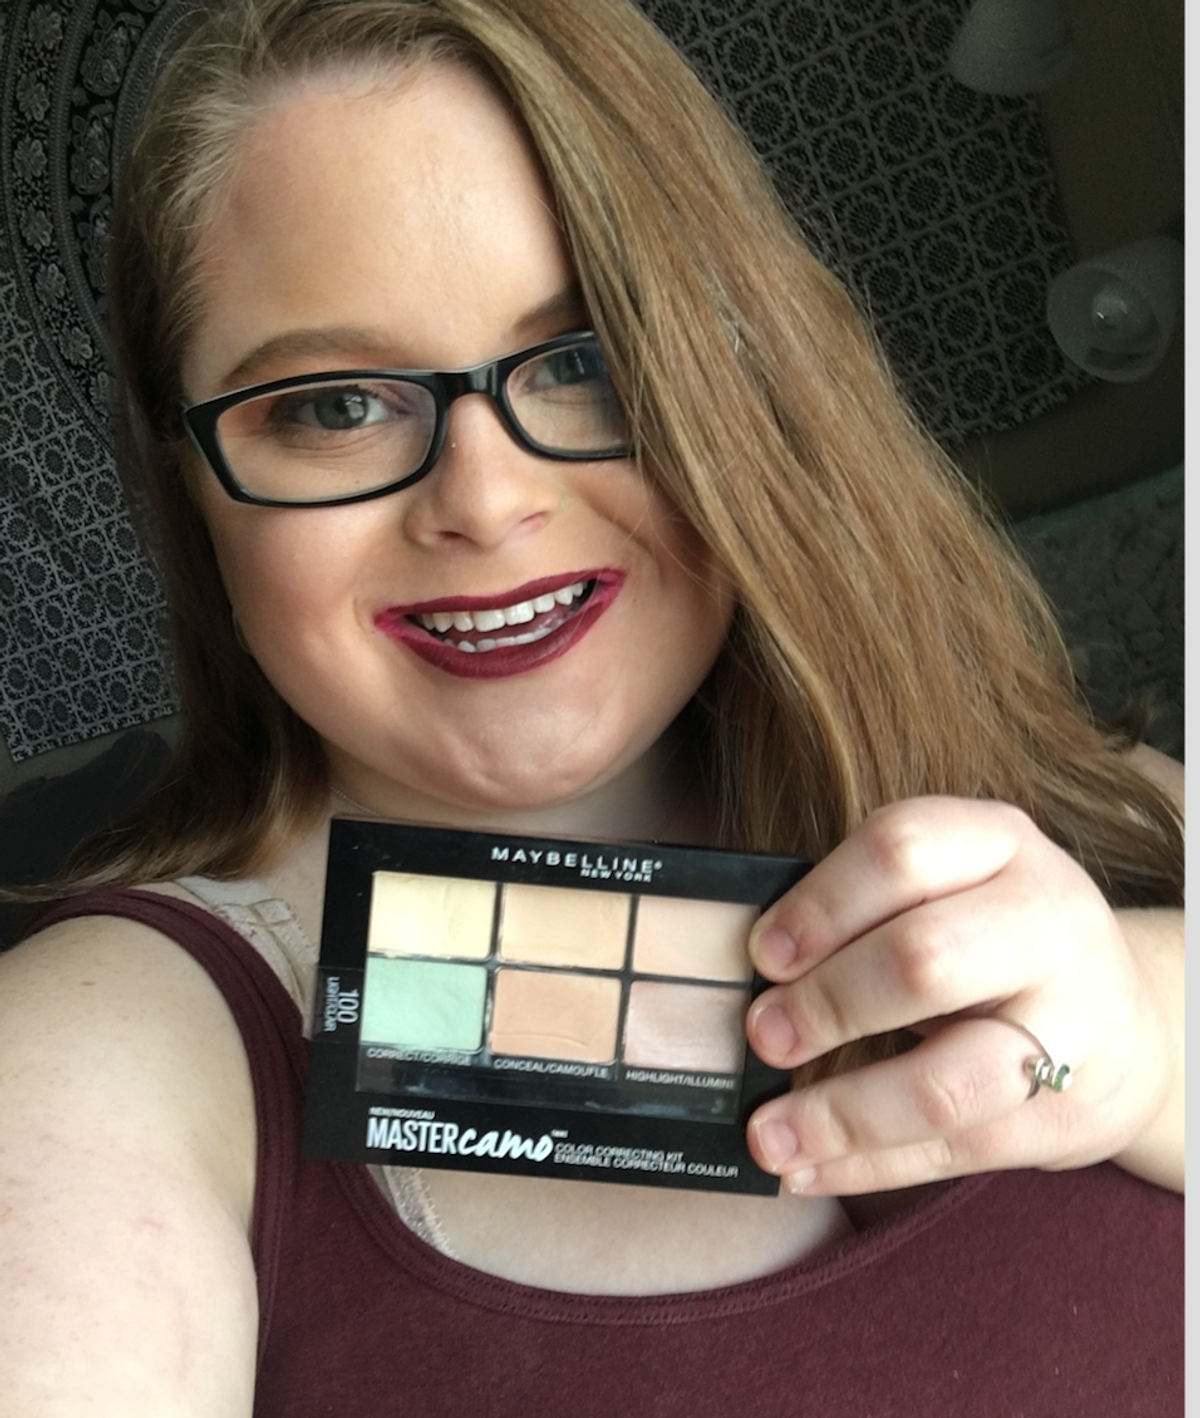 Maybelline Cosmetics: The Master Camo Palette Review